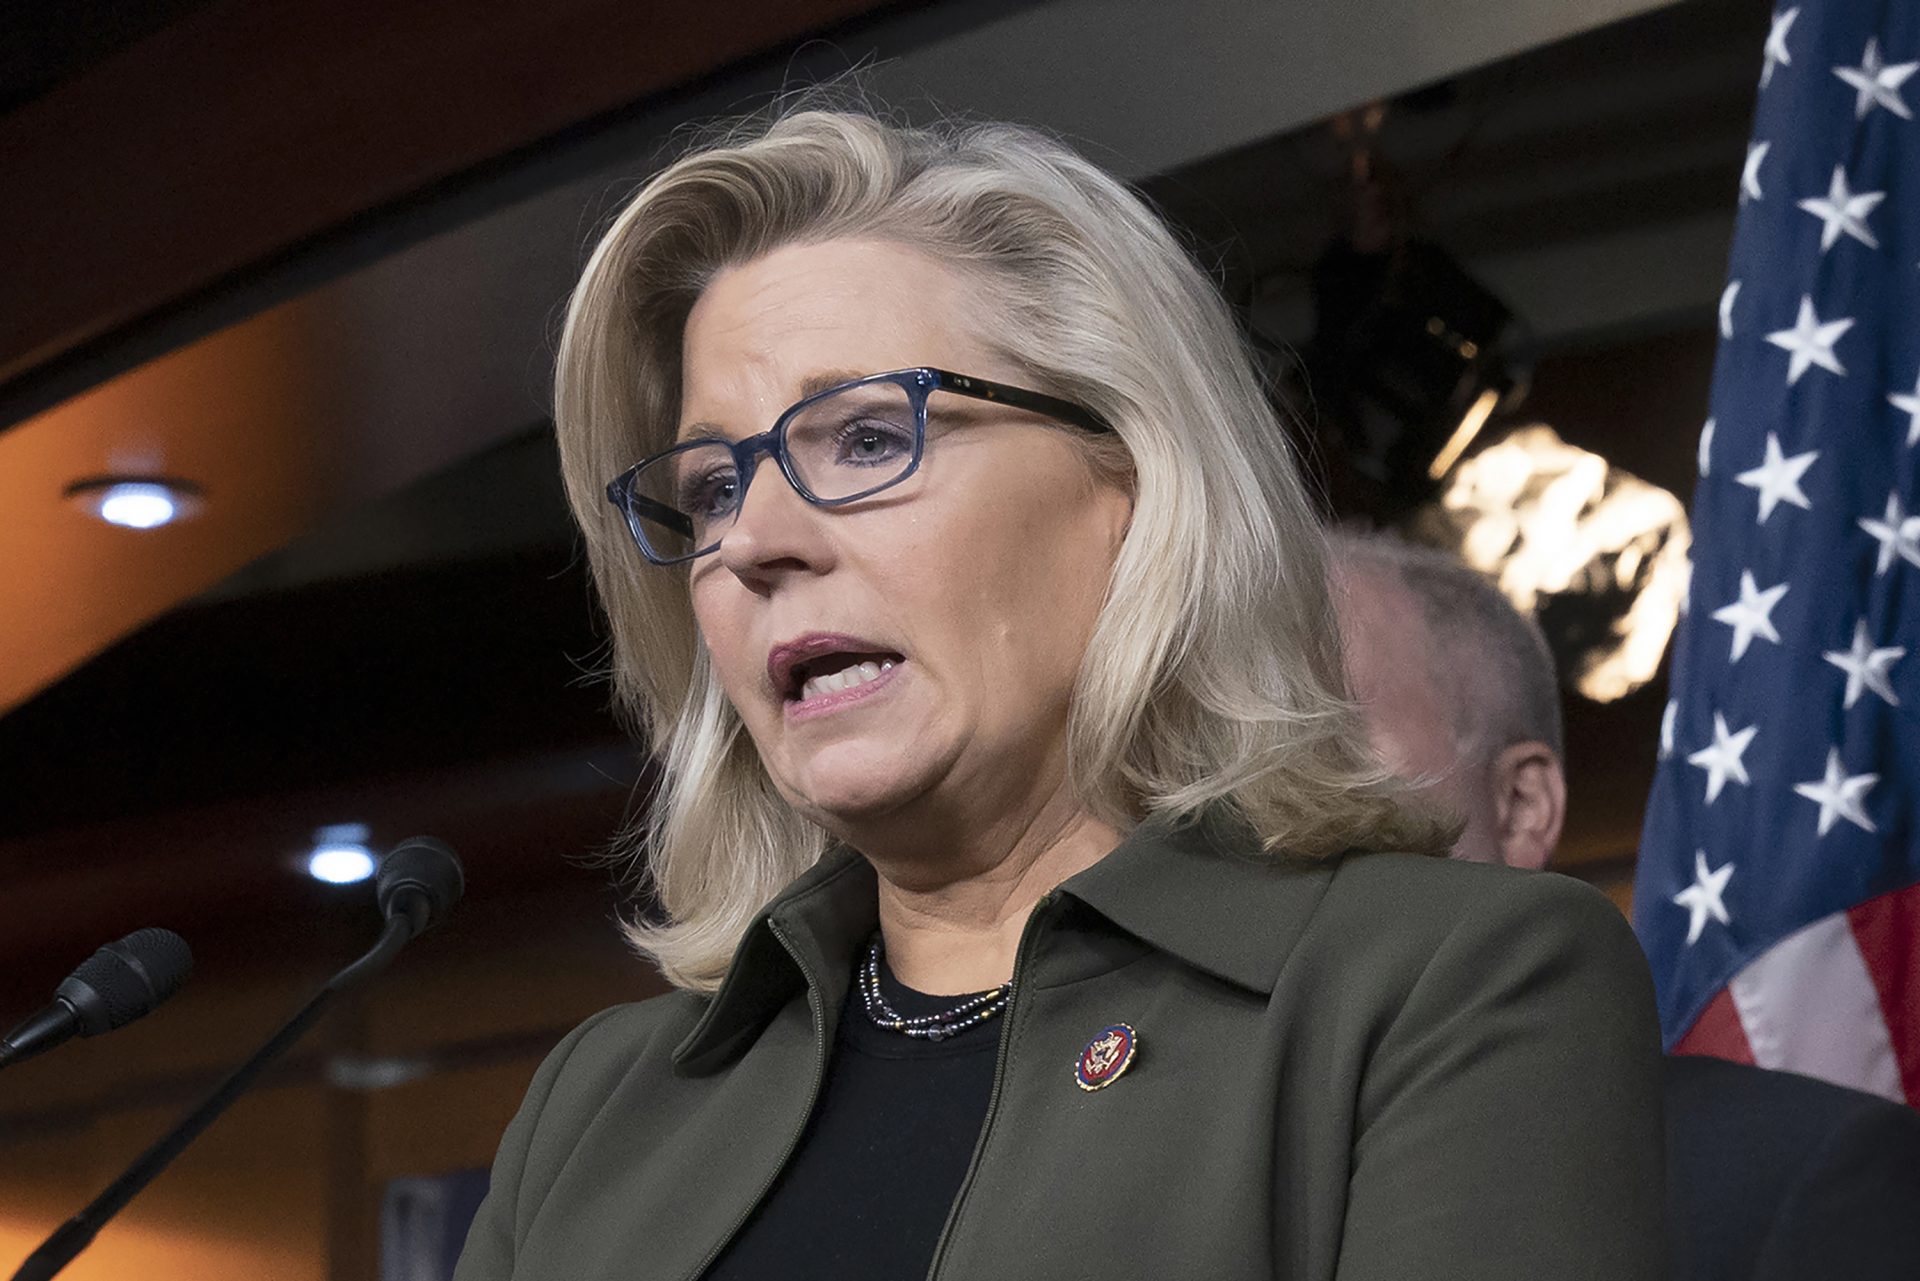 In this Dec. 17, 2019 file photo, Rep. Liz Cheney, R-Wyo., speaks with reporters at the Capitol in Washington.